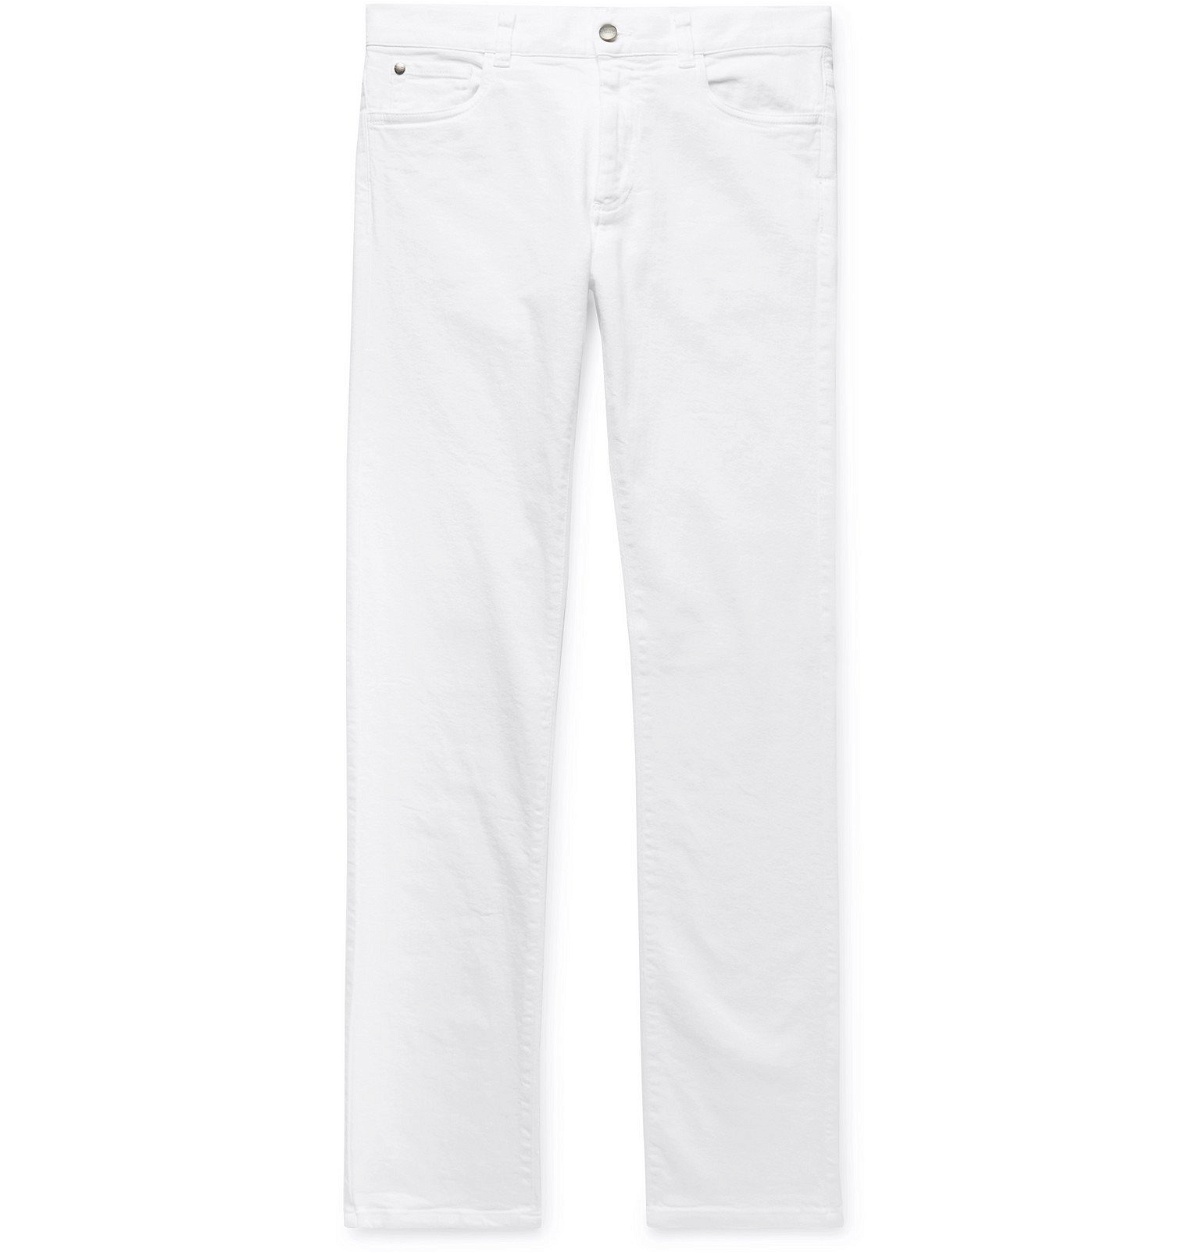 Canali - Slim-Fit Stretch-Cotton Twill Trousers - White Canali